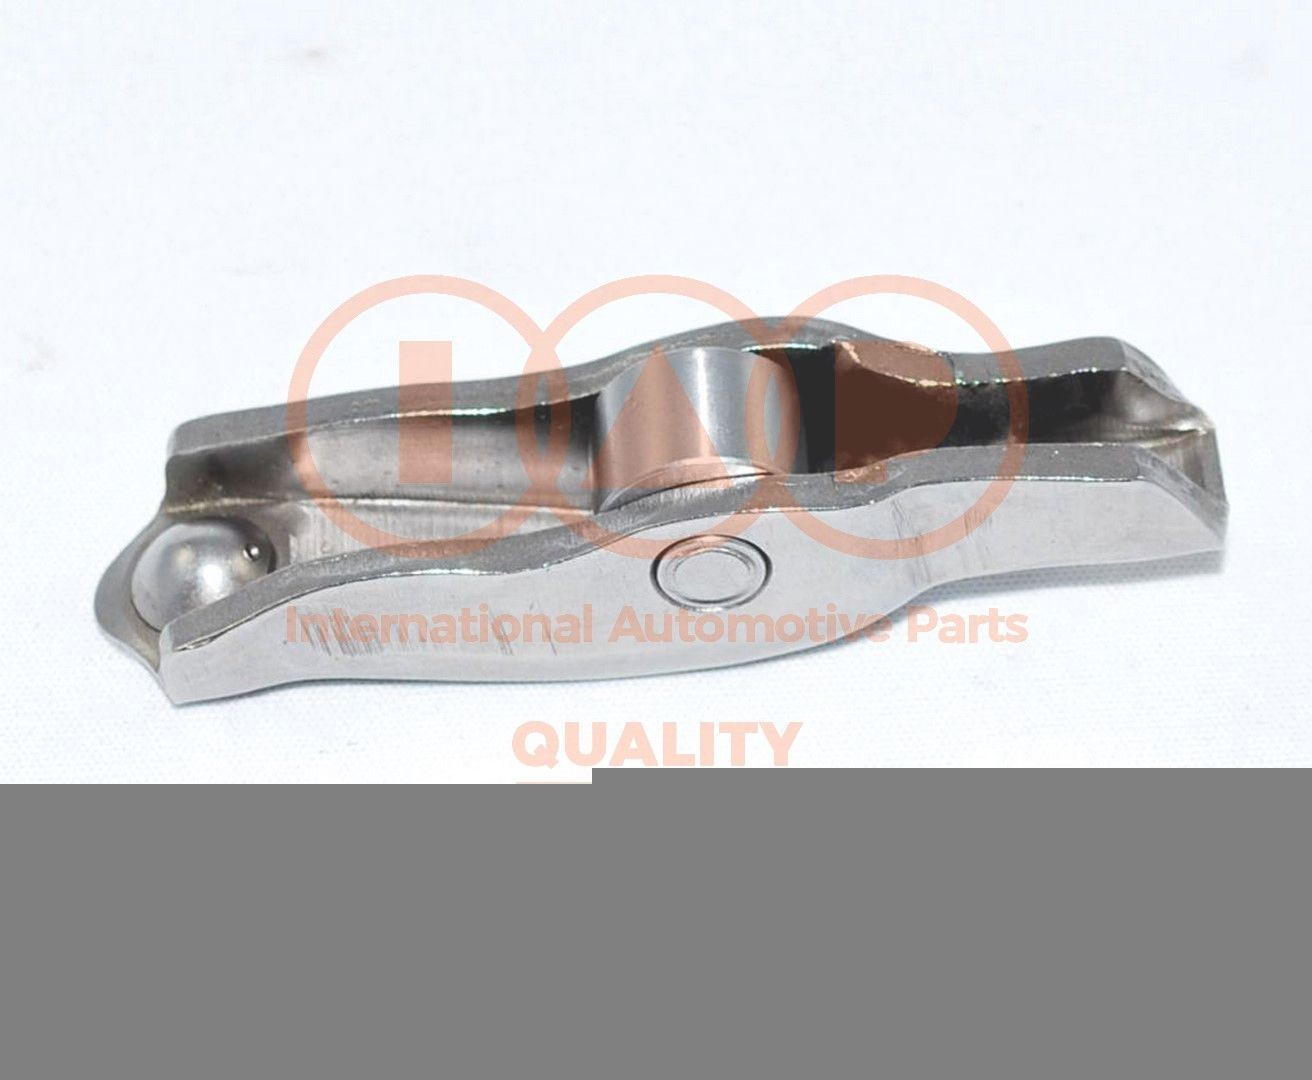 125-07086 IAP QUALITY PARTS Hydraulic lifter buy cheap